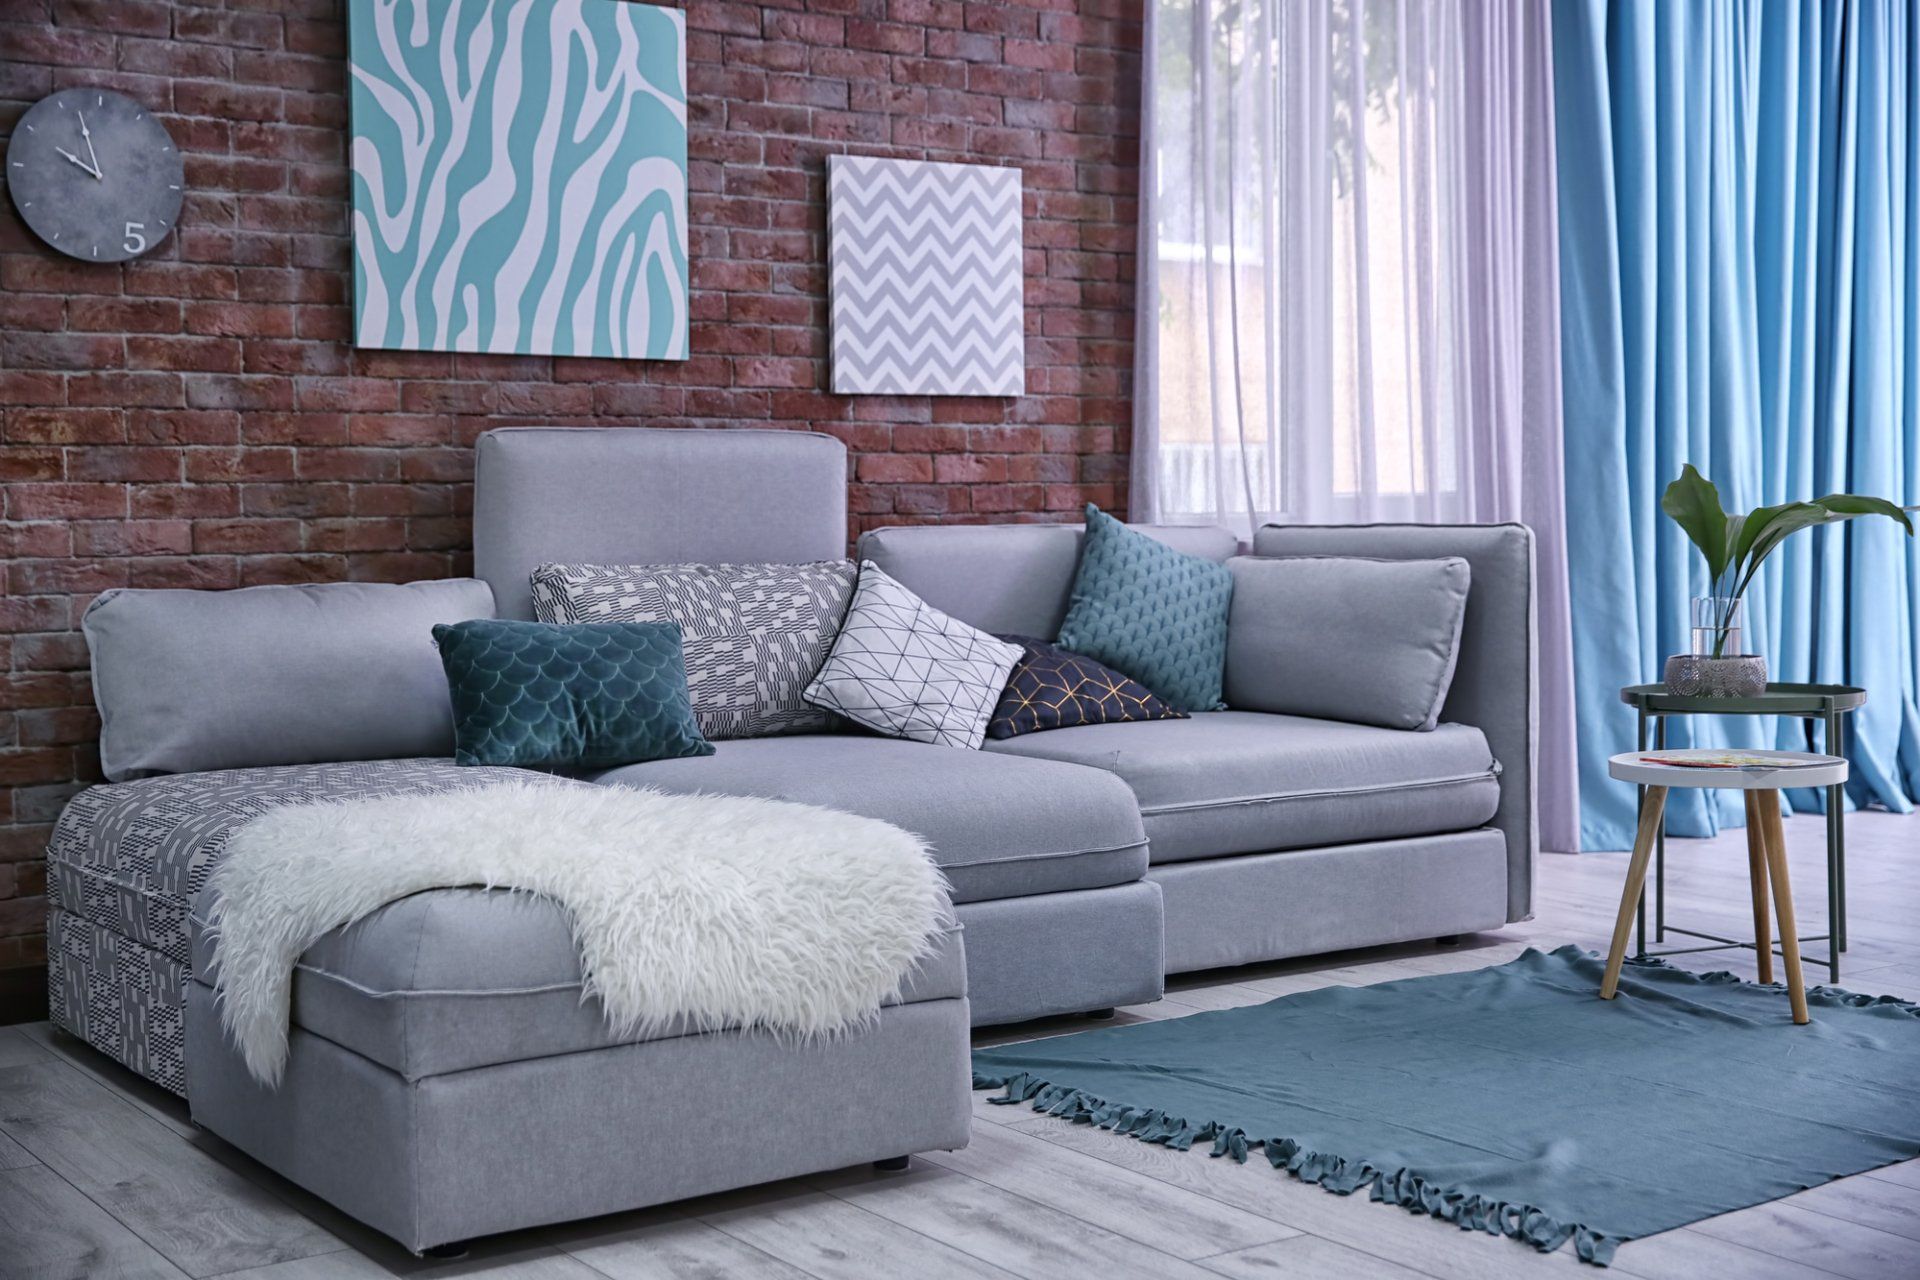 Brick walled lounge with grey couch covered with multiple cushions. Aqua toned art on wall complementing aqua run and drapes pulled aside to show soft sheers behind.